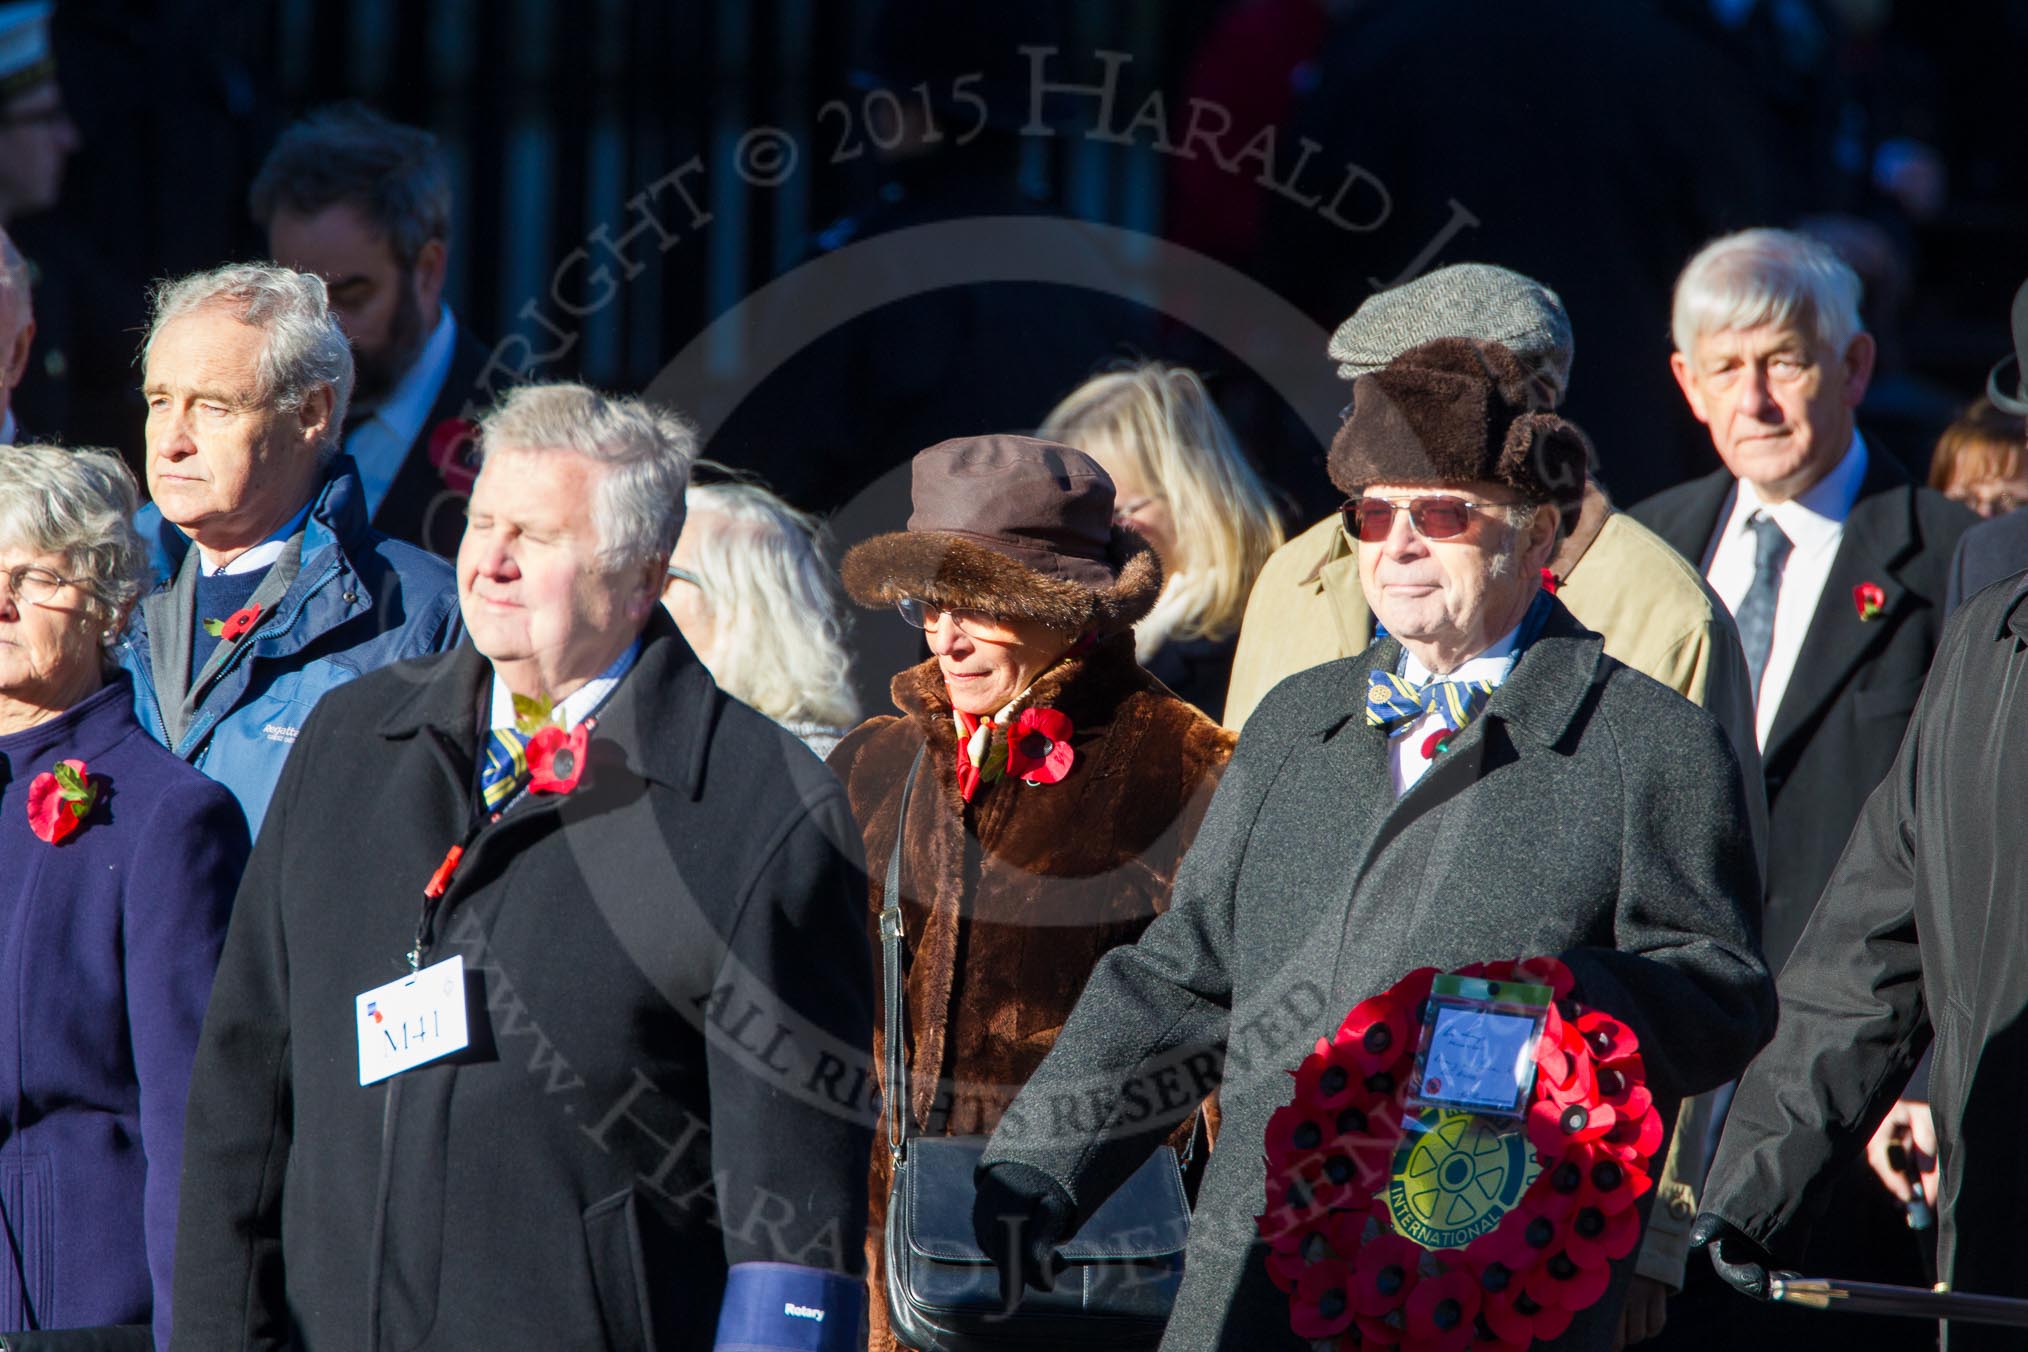 Remembrance Sunday Cenotaph March Past 2013: M41 - Rotary International..
Press stand opposite the Foreign Office building, Whitehall, London SW1,
London,
Greater London,
United Kingdom,
on 10 November 2013 at 12:14, image #2194